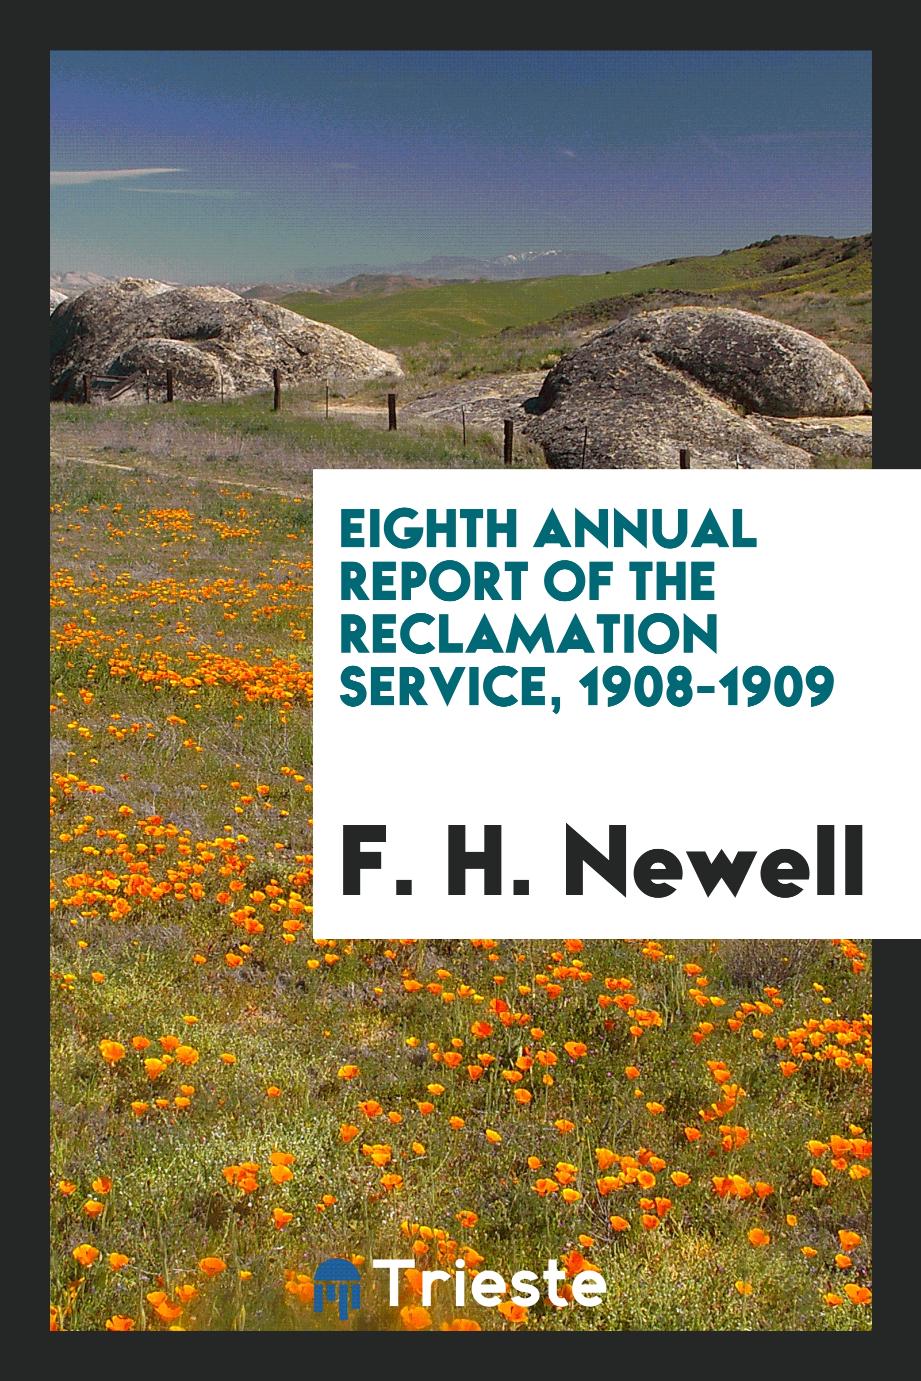 Eighth Annual Report of the Reclamation Service, 1908-1909